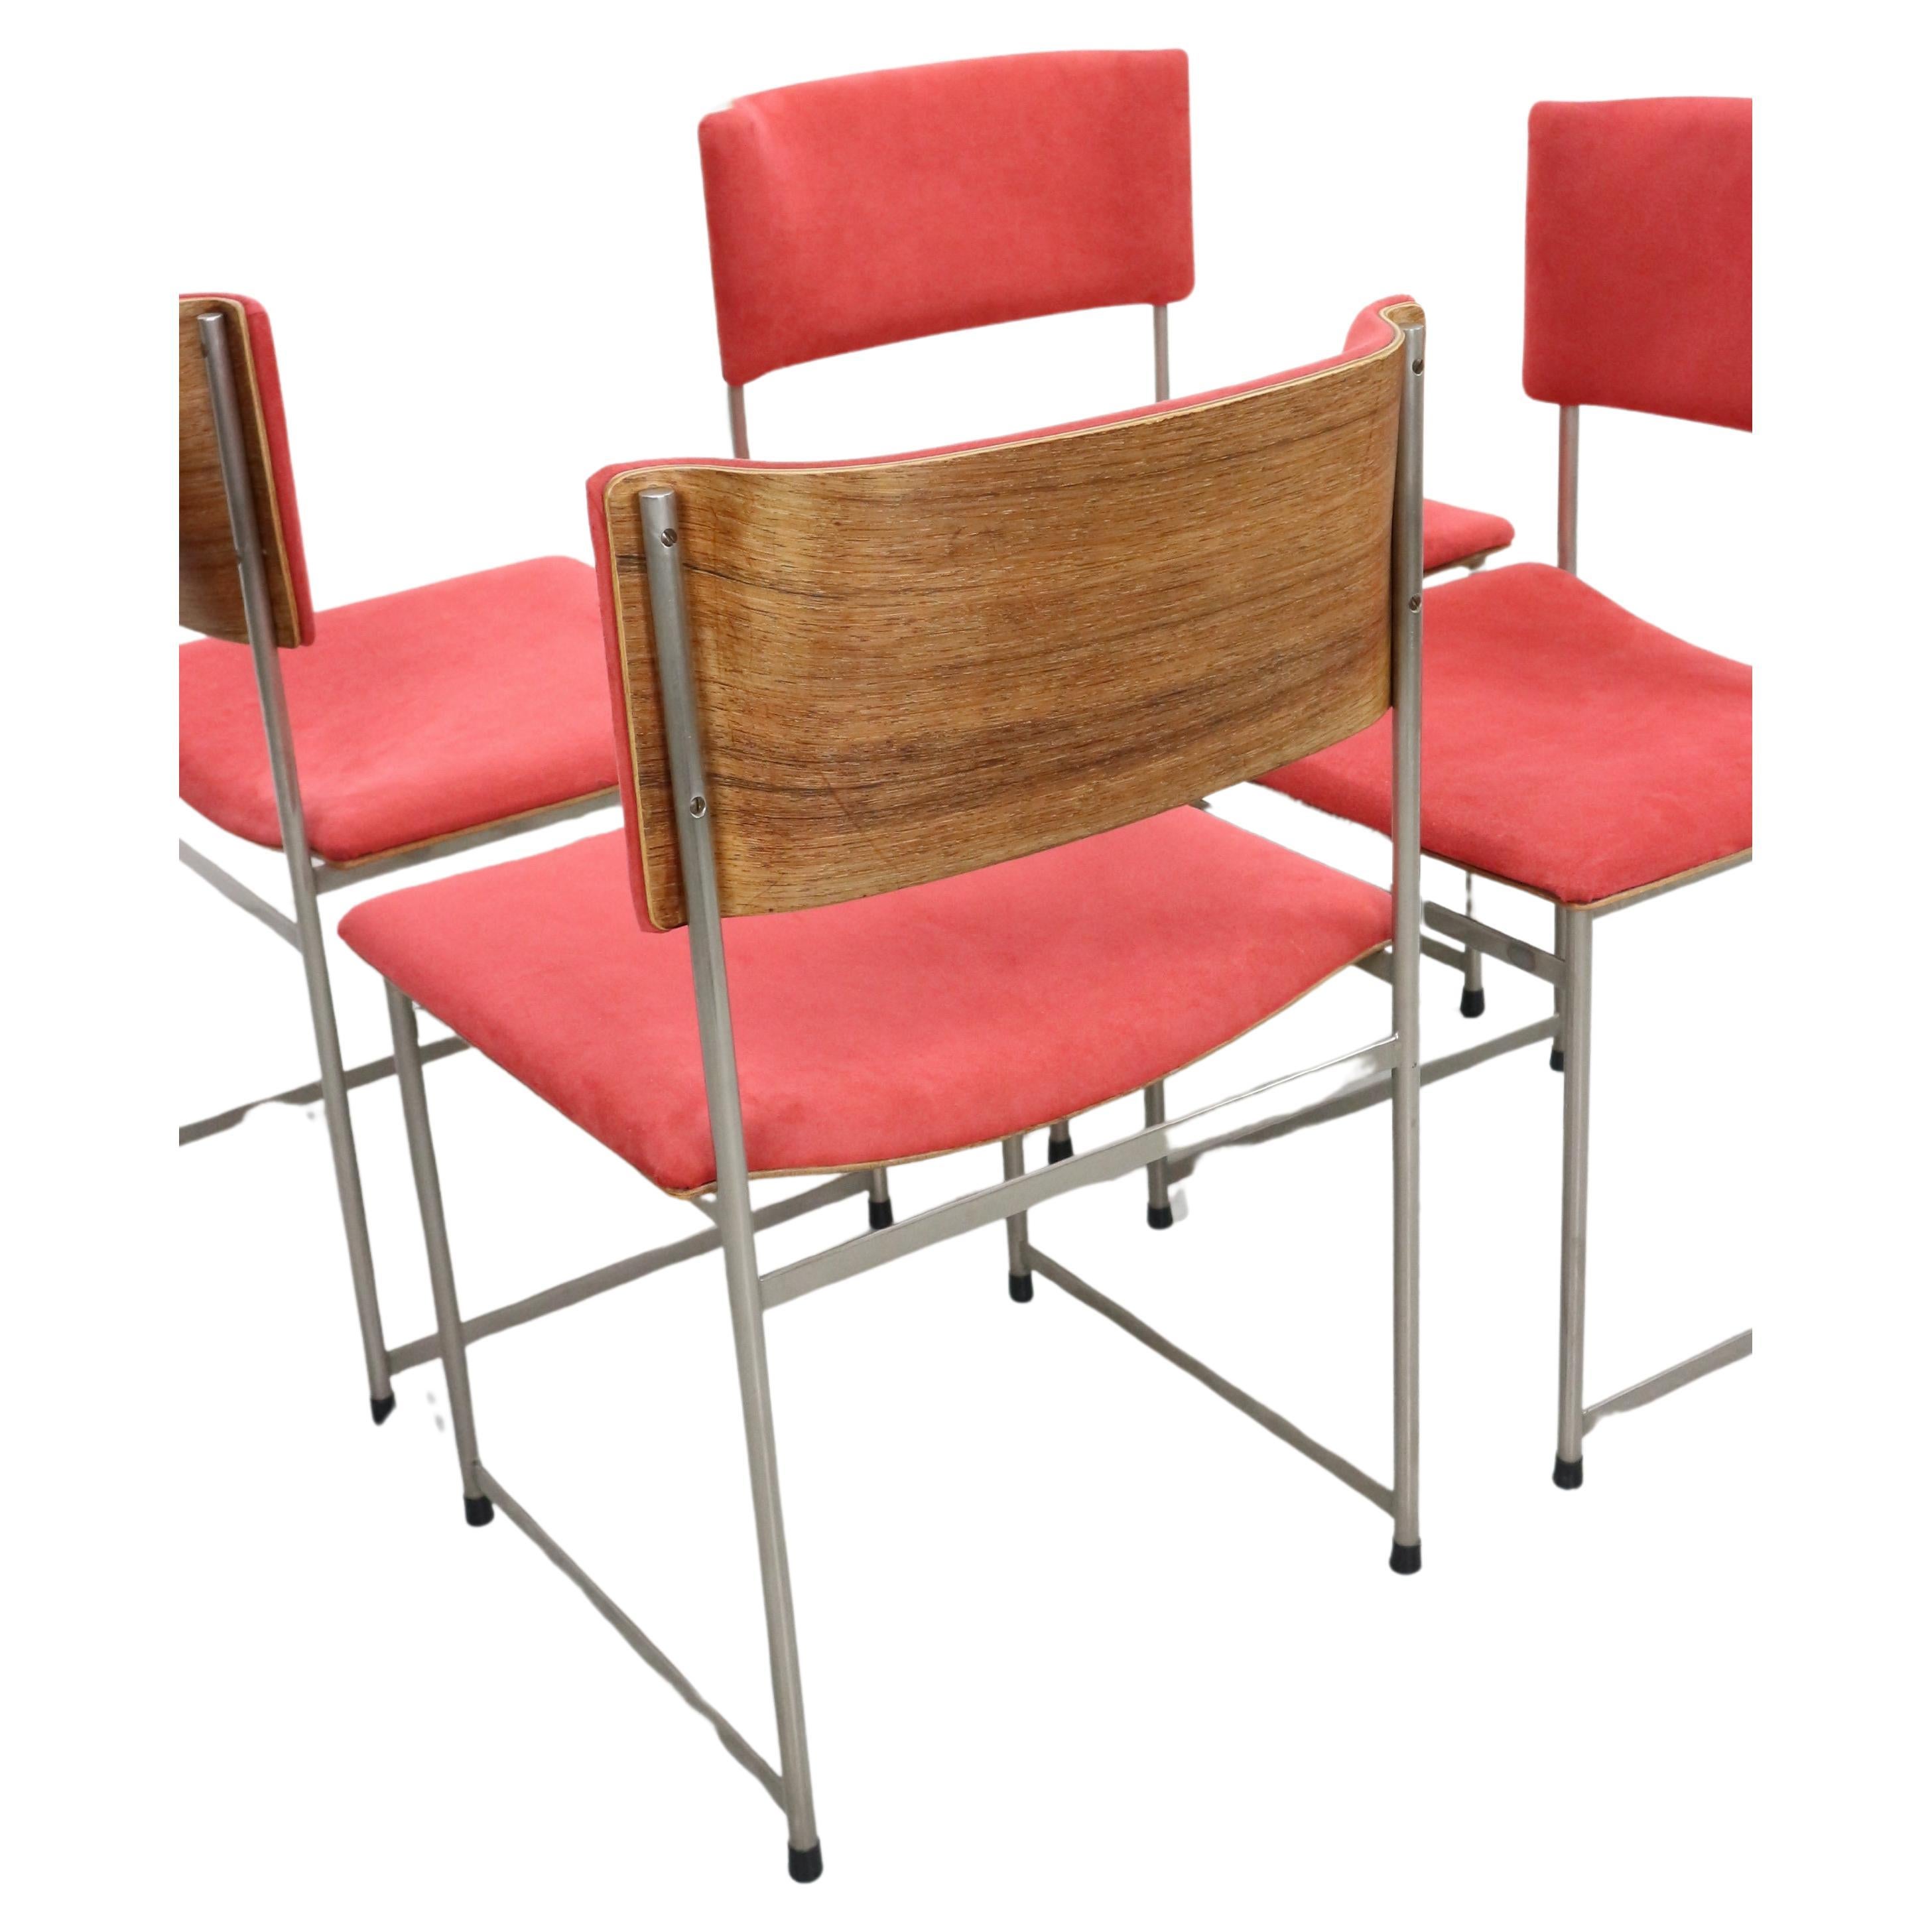 Set of 4 SM08 chairs designed in the 1950's by Cees Braakman for UMS Pastoe in the Netherlands. Nickel-plated metal frame and teak bentwood veneer backrest. The original alcantara upholstery is in good condition, some small pilling in the front side